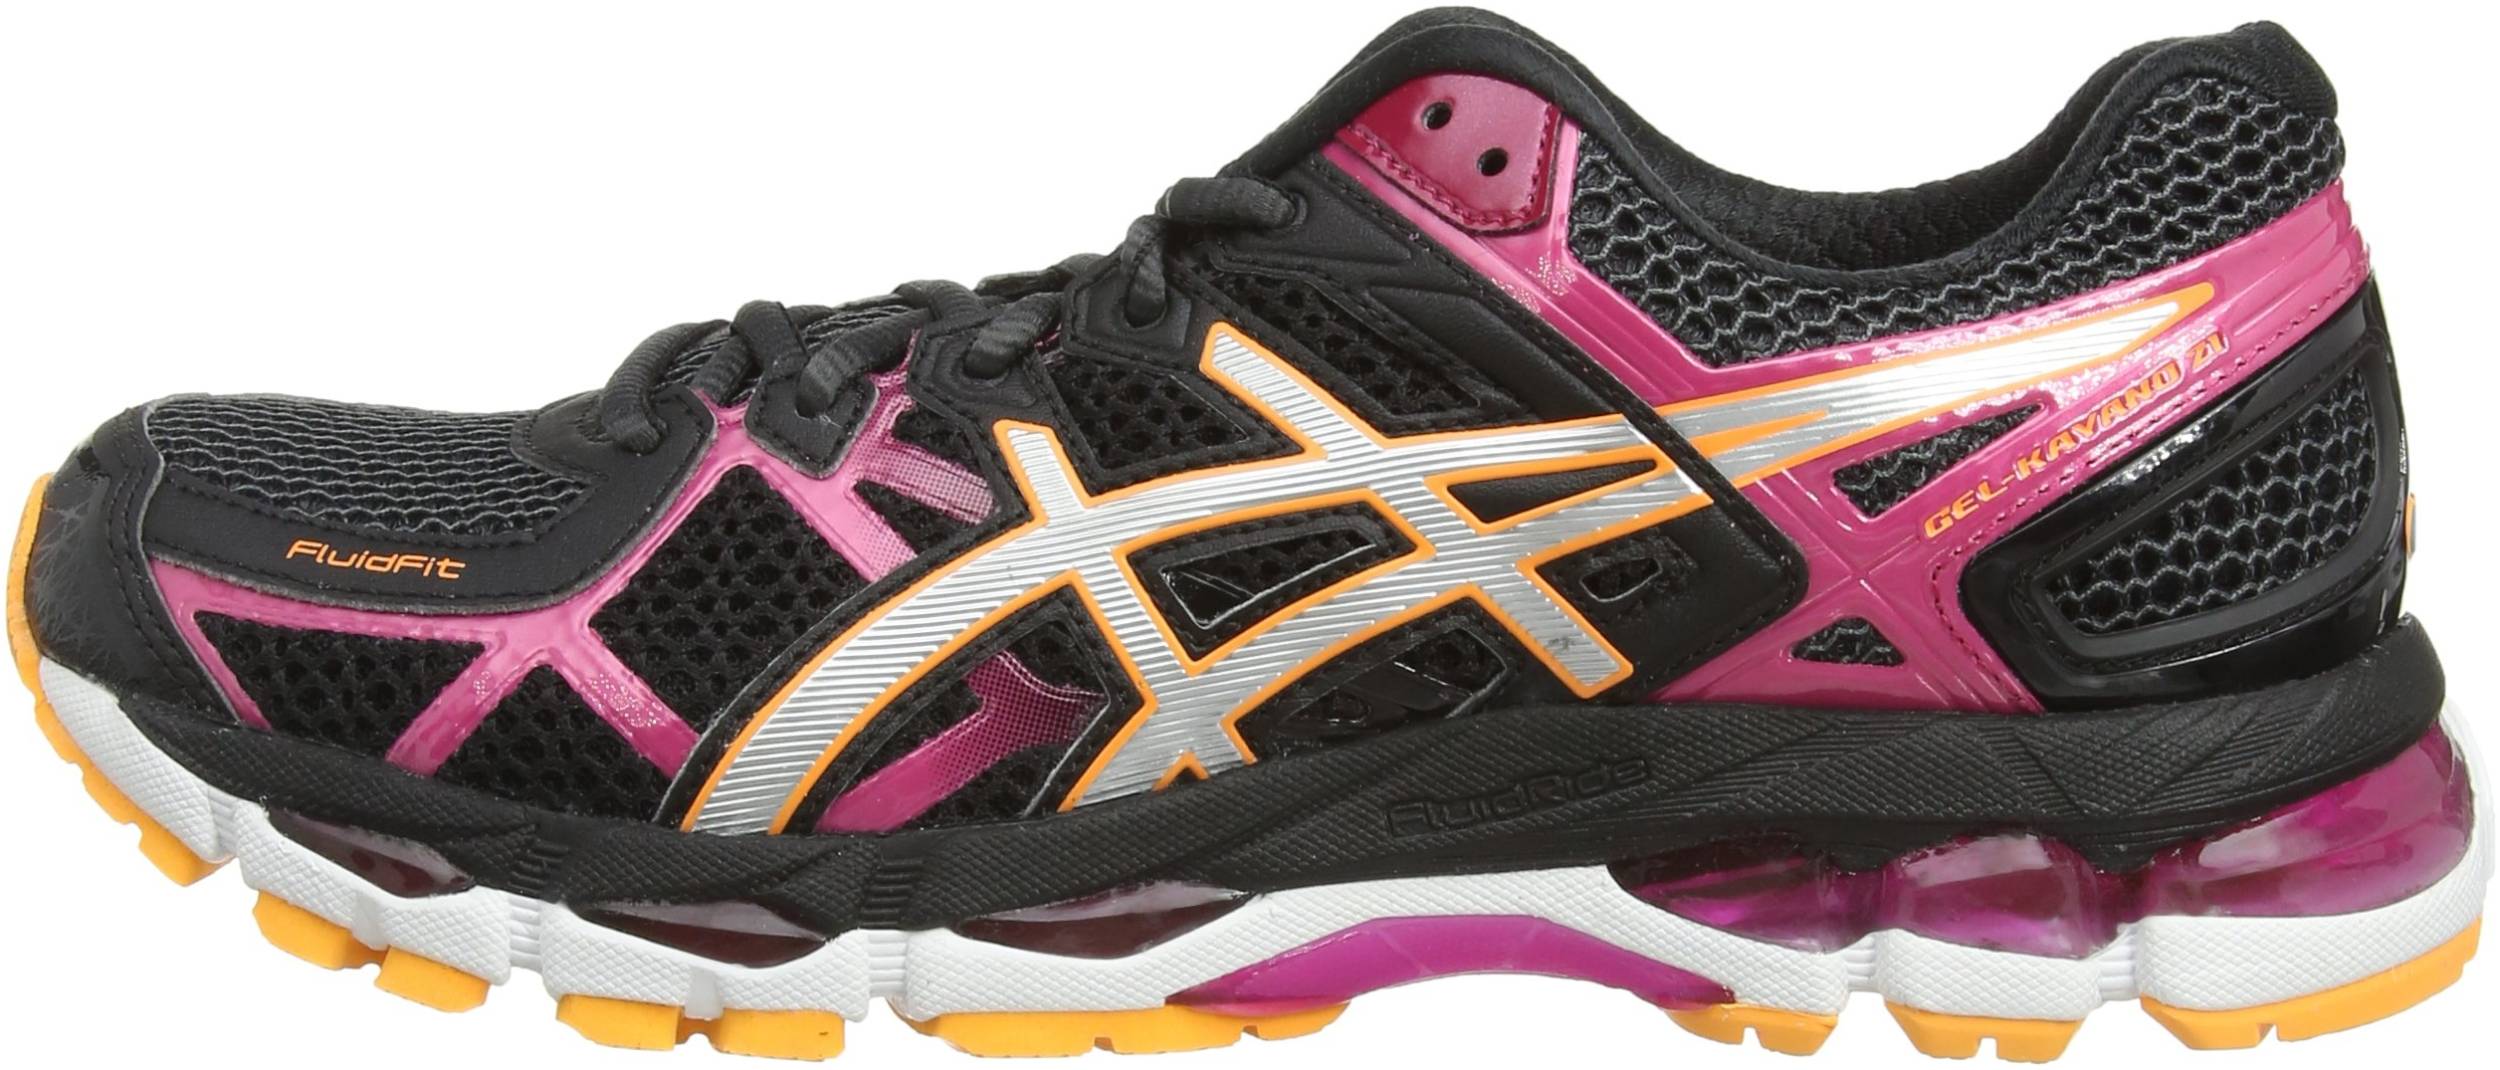 ASICS Kayano 21 Review Facts, Deals |